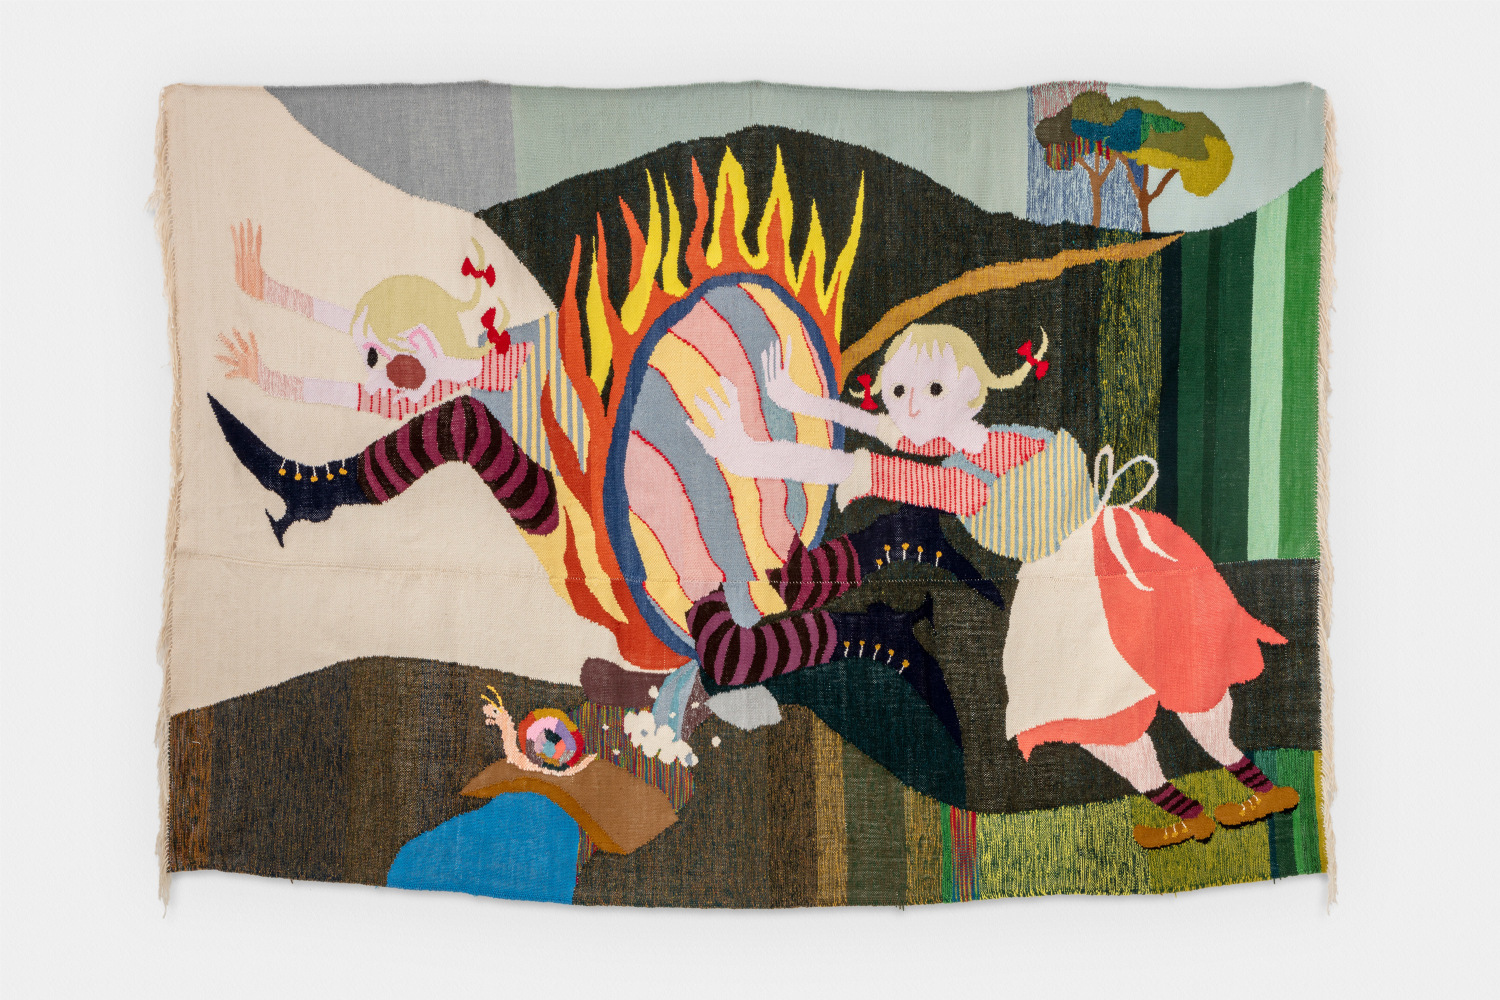 Christina Forrer
Gretel, Gretel, 2022
Cotton and wool
72 1/2 x 102 inches
(184.2 x 259.1 cm)